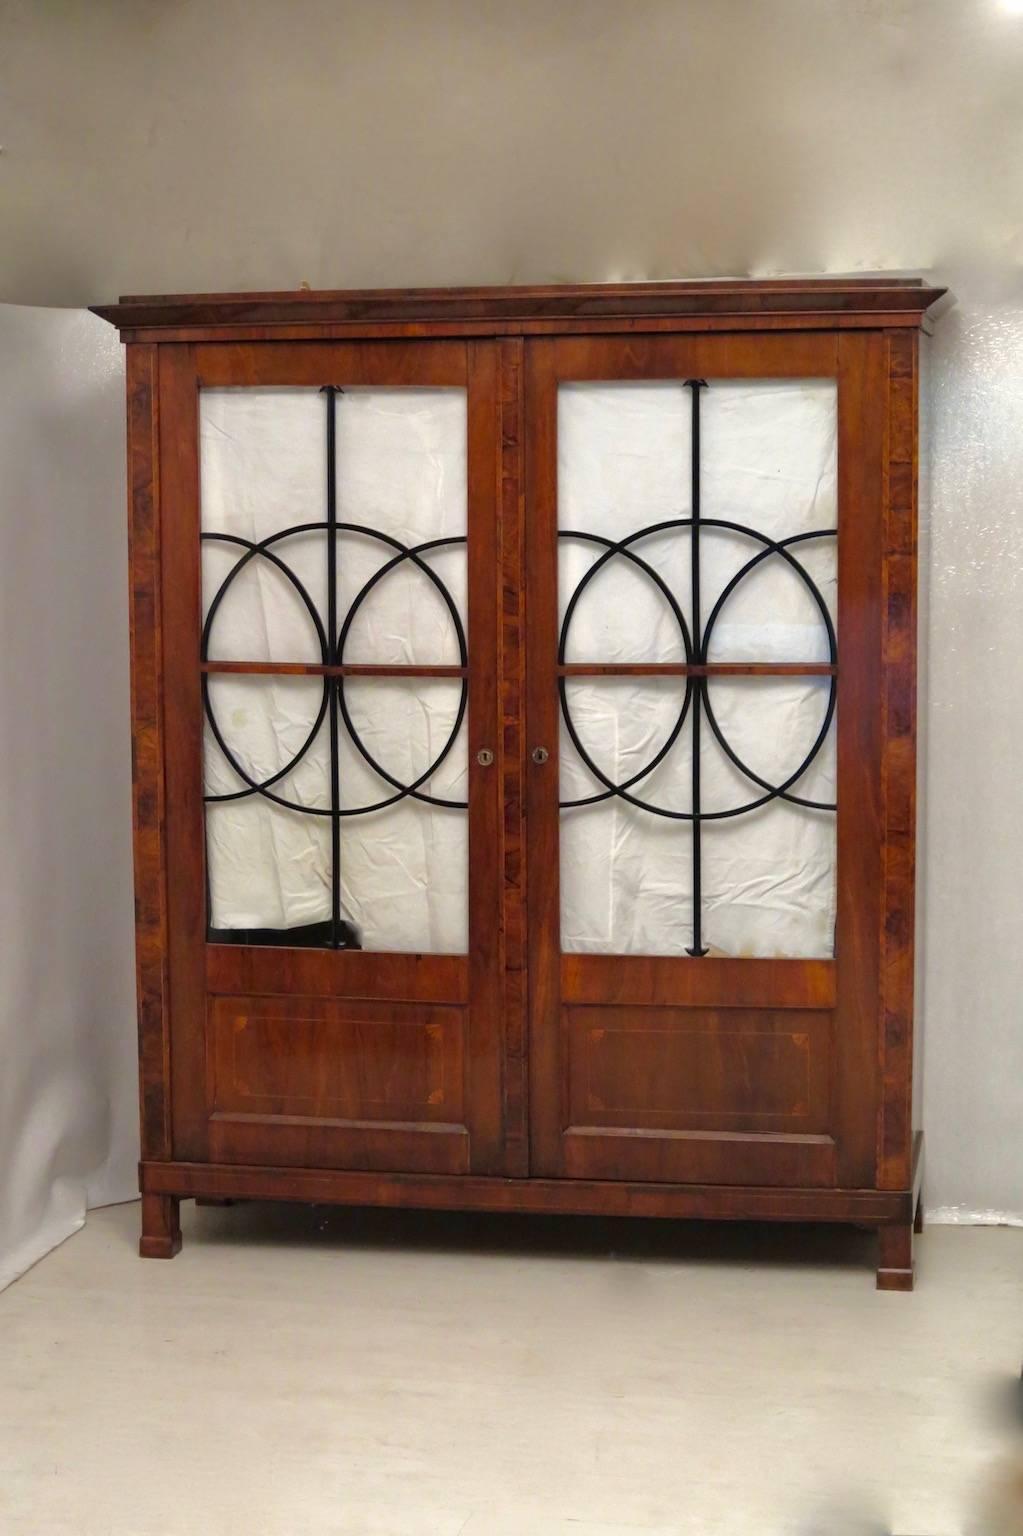 Austrian Biedermeier bookcase. All veneered in walnut, with lighter wood for the inlays. Squared, with two large front doors. These are formed by a large frame, with a wooden screen at the bottom and with a glass at the top. The part with the glass,